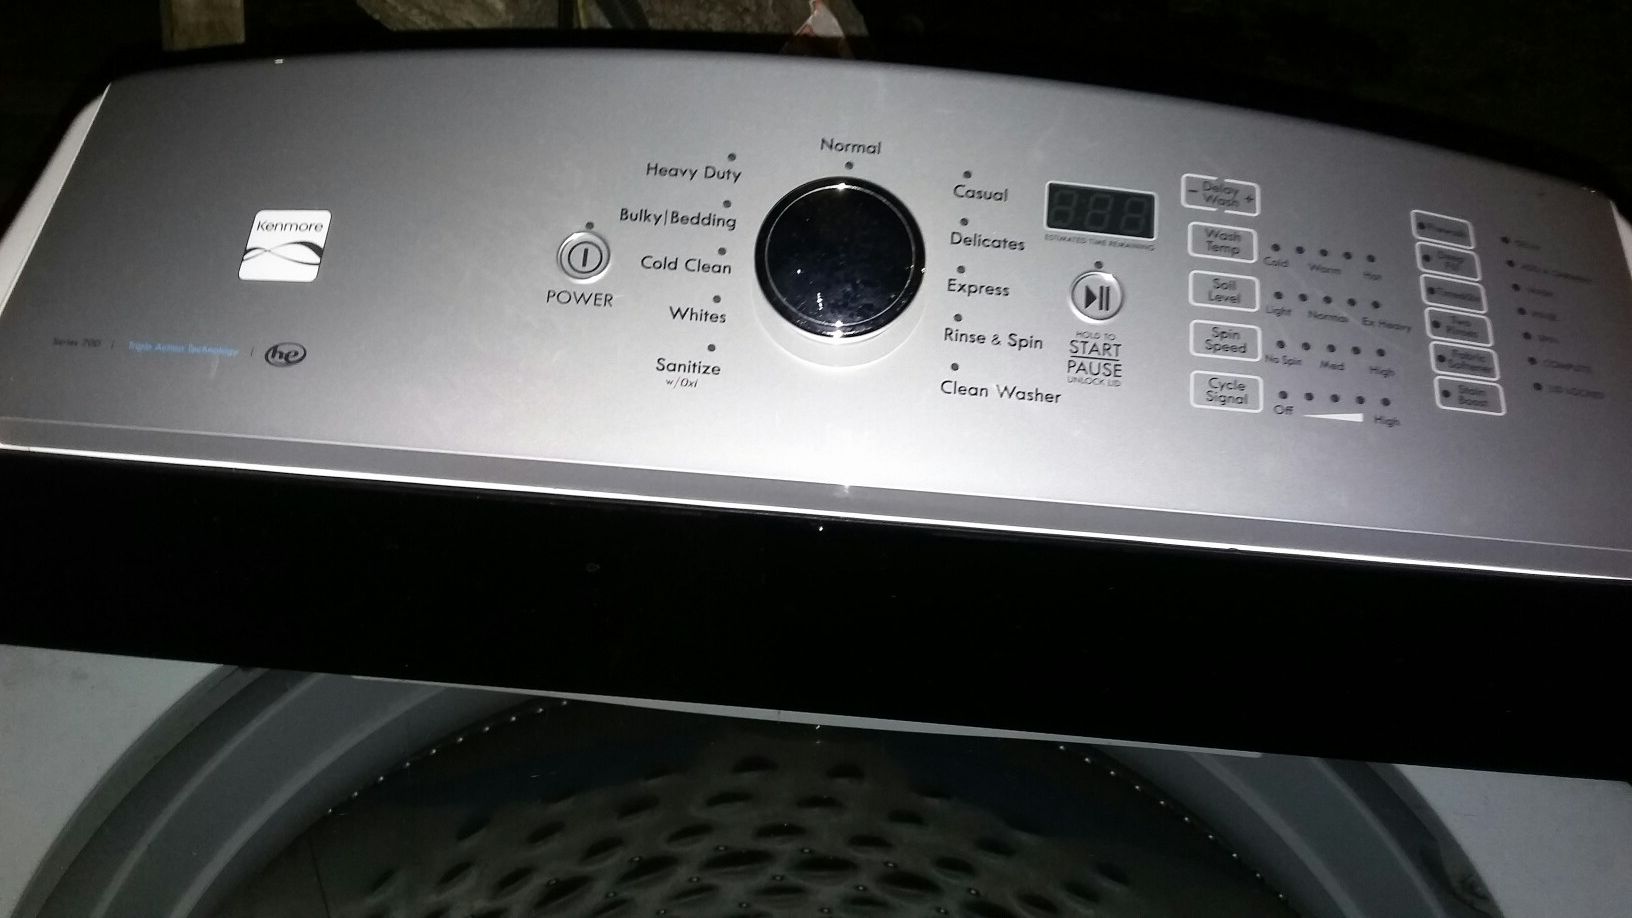 Kenmore 700 series washer Cabrio giant capacity dryer combo